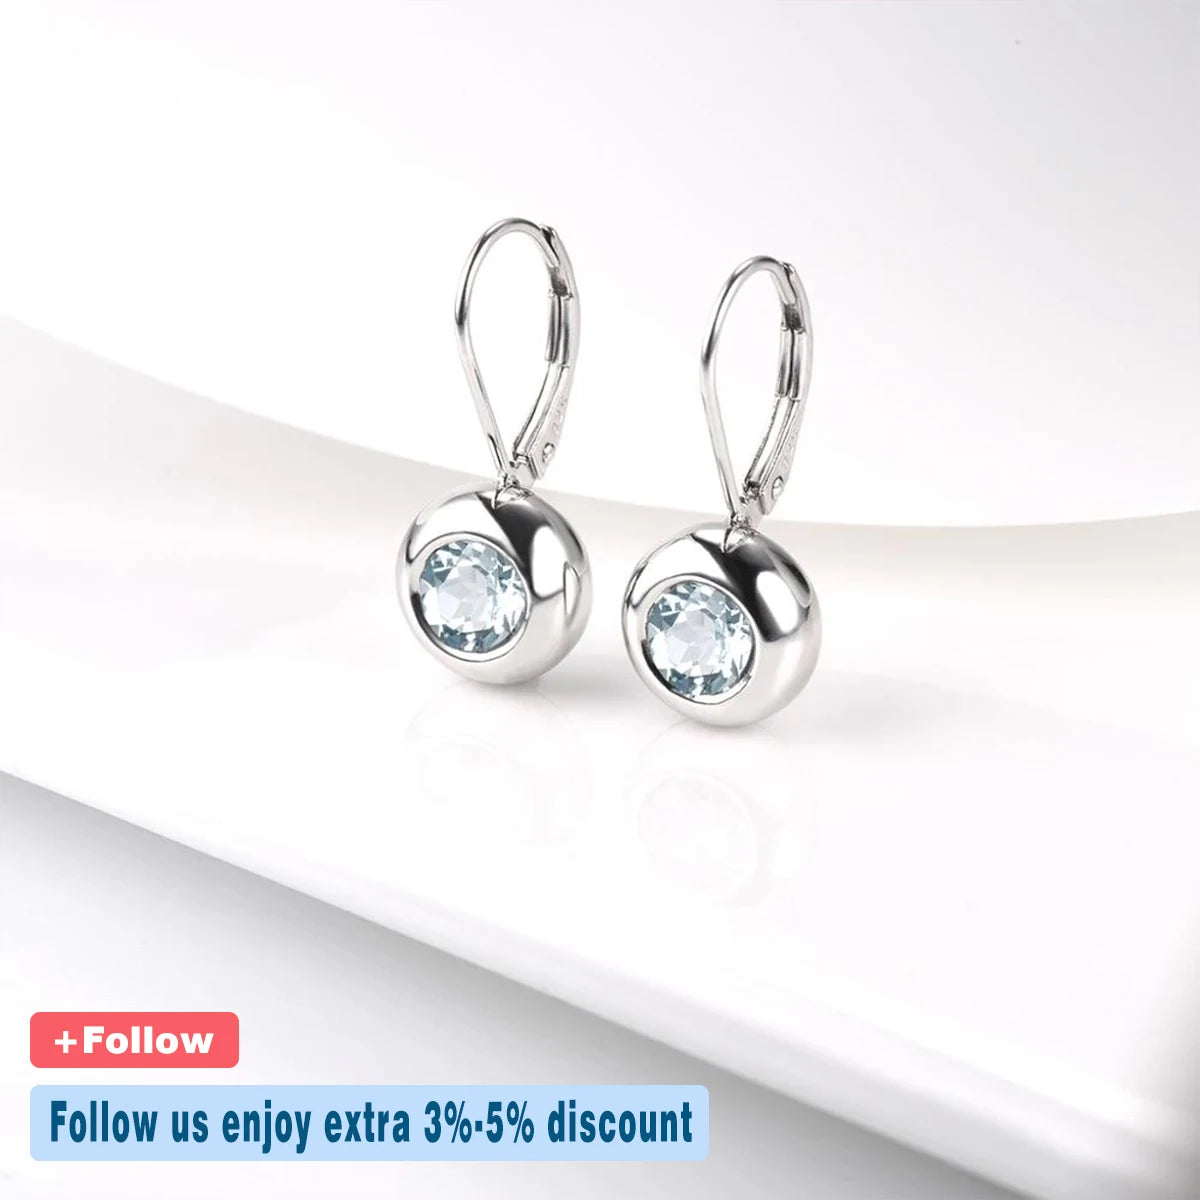 Hutang Natural Aquamarine Women's Clip Earrings Solid 925 Sterling Silver Blue Gemstone Fine Elegant Bridal Jewelry New Arrival